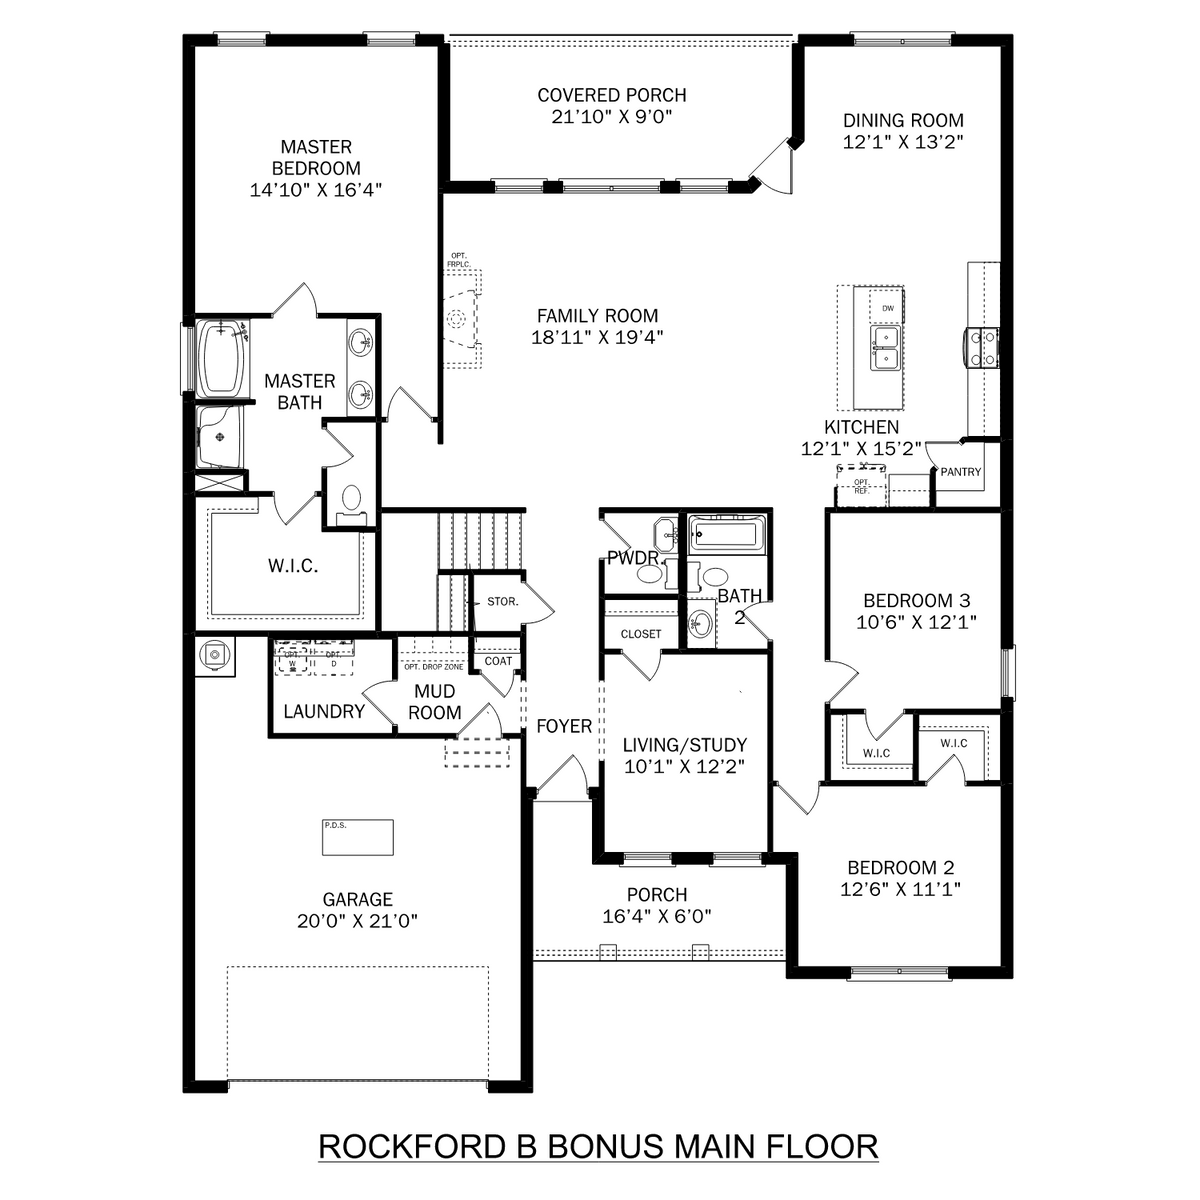 1 - The Rockford B with Bonus buildable floor plan layout in Davidson Homes' Pikes Ridge community.